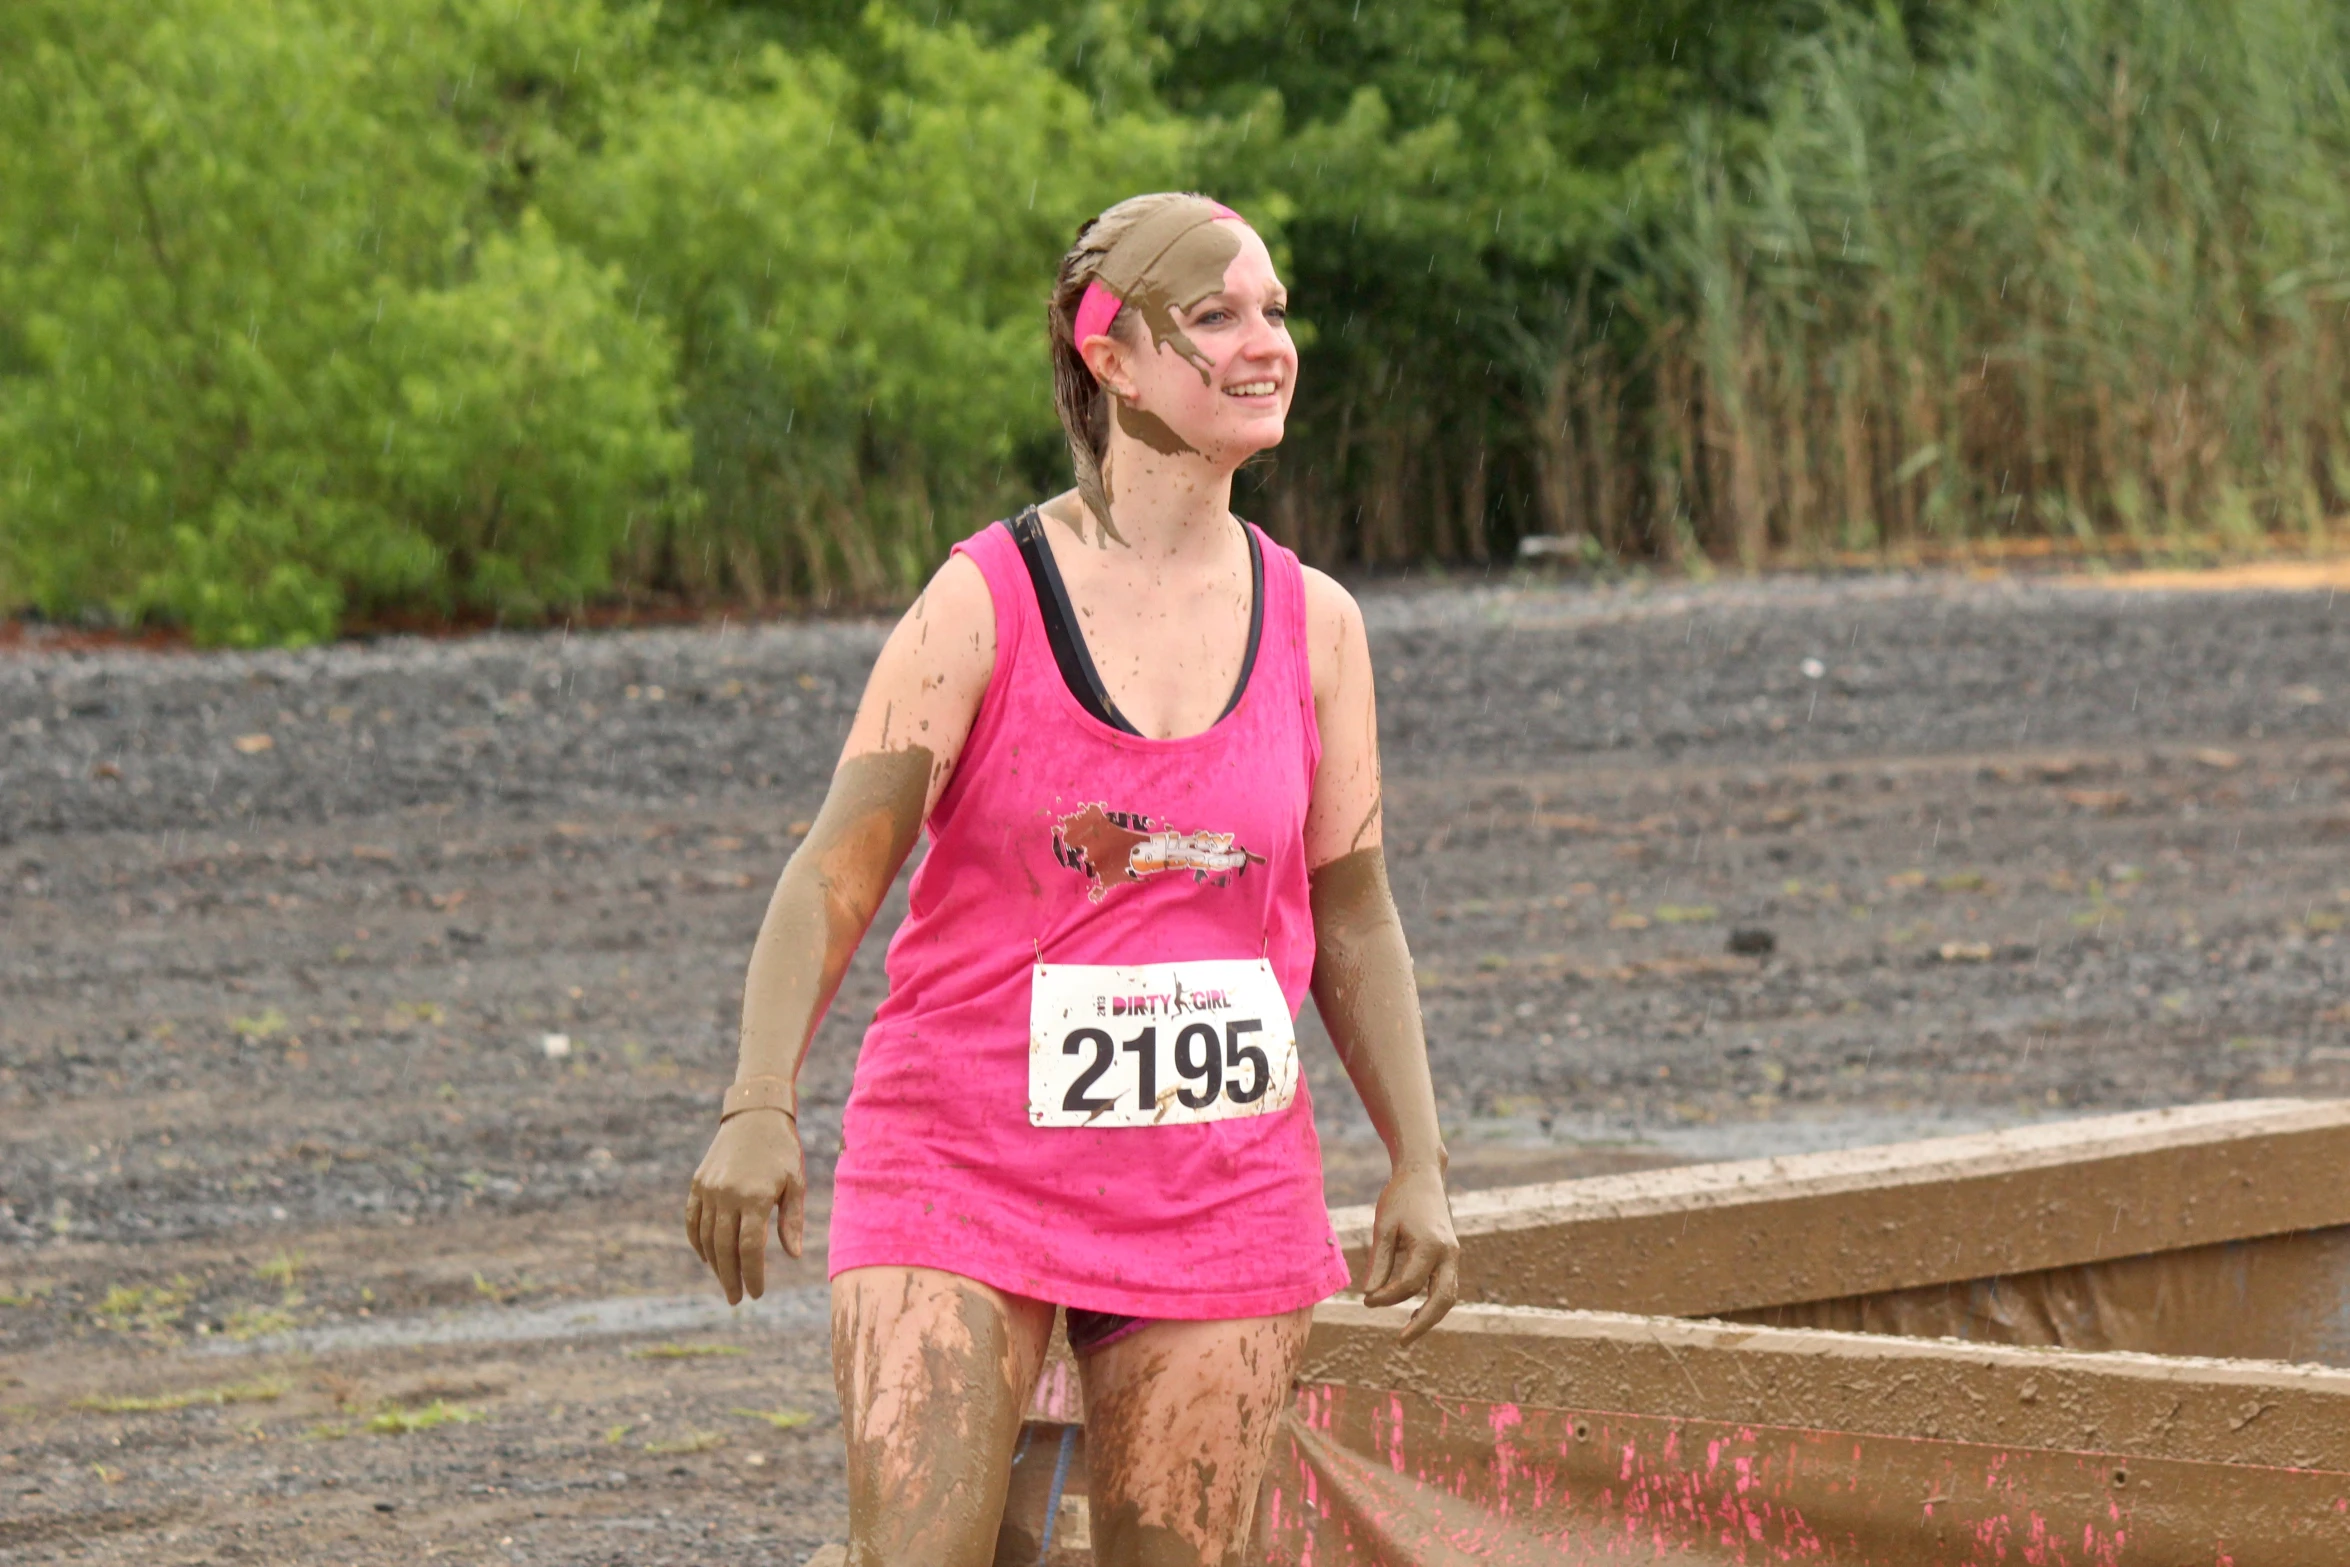 a young woman running on muddy ground with trees in the background